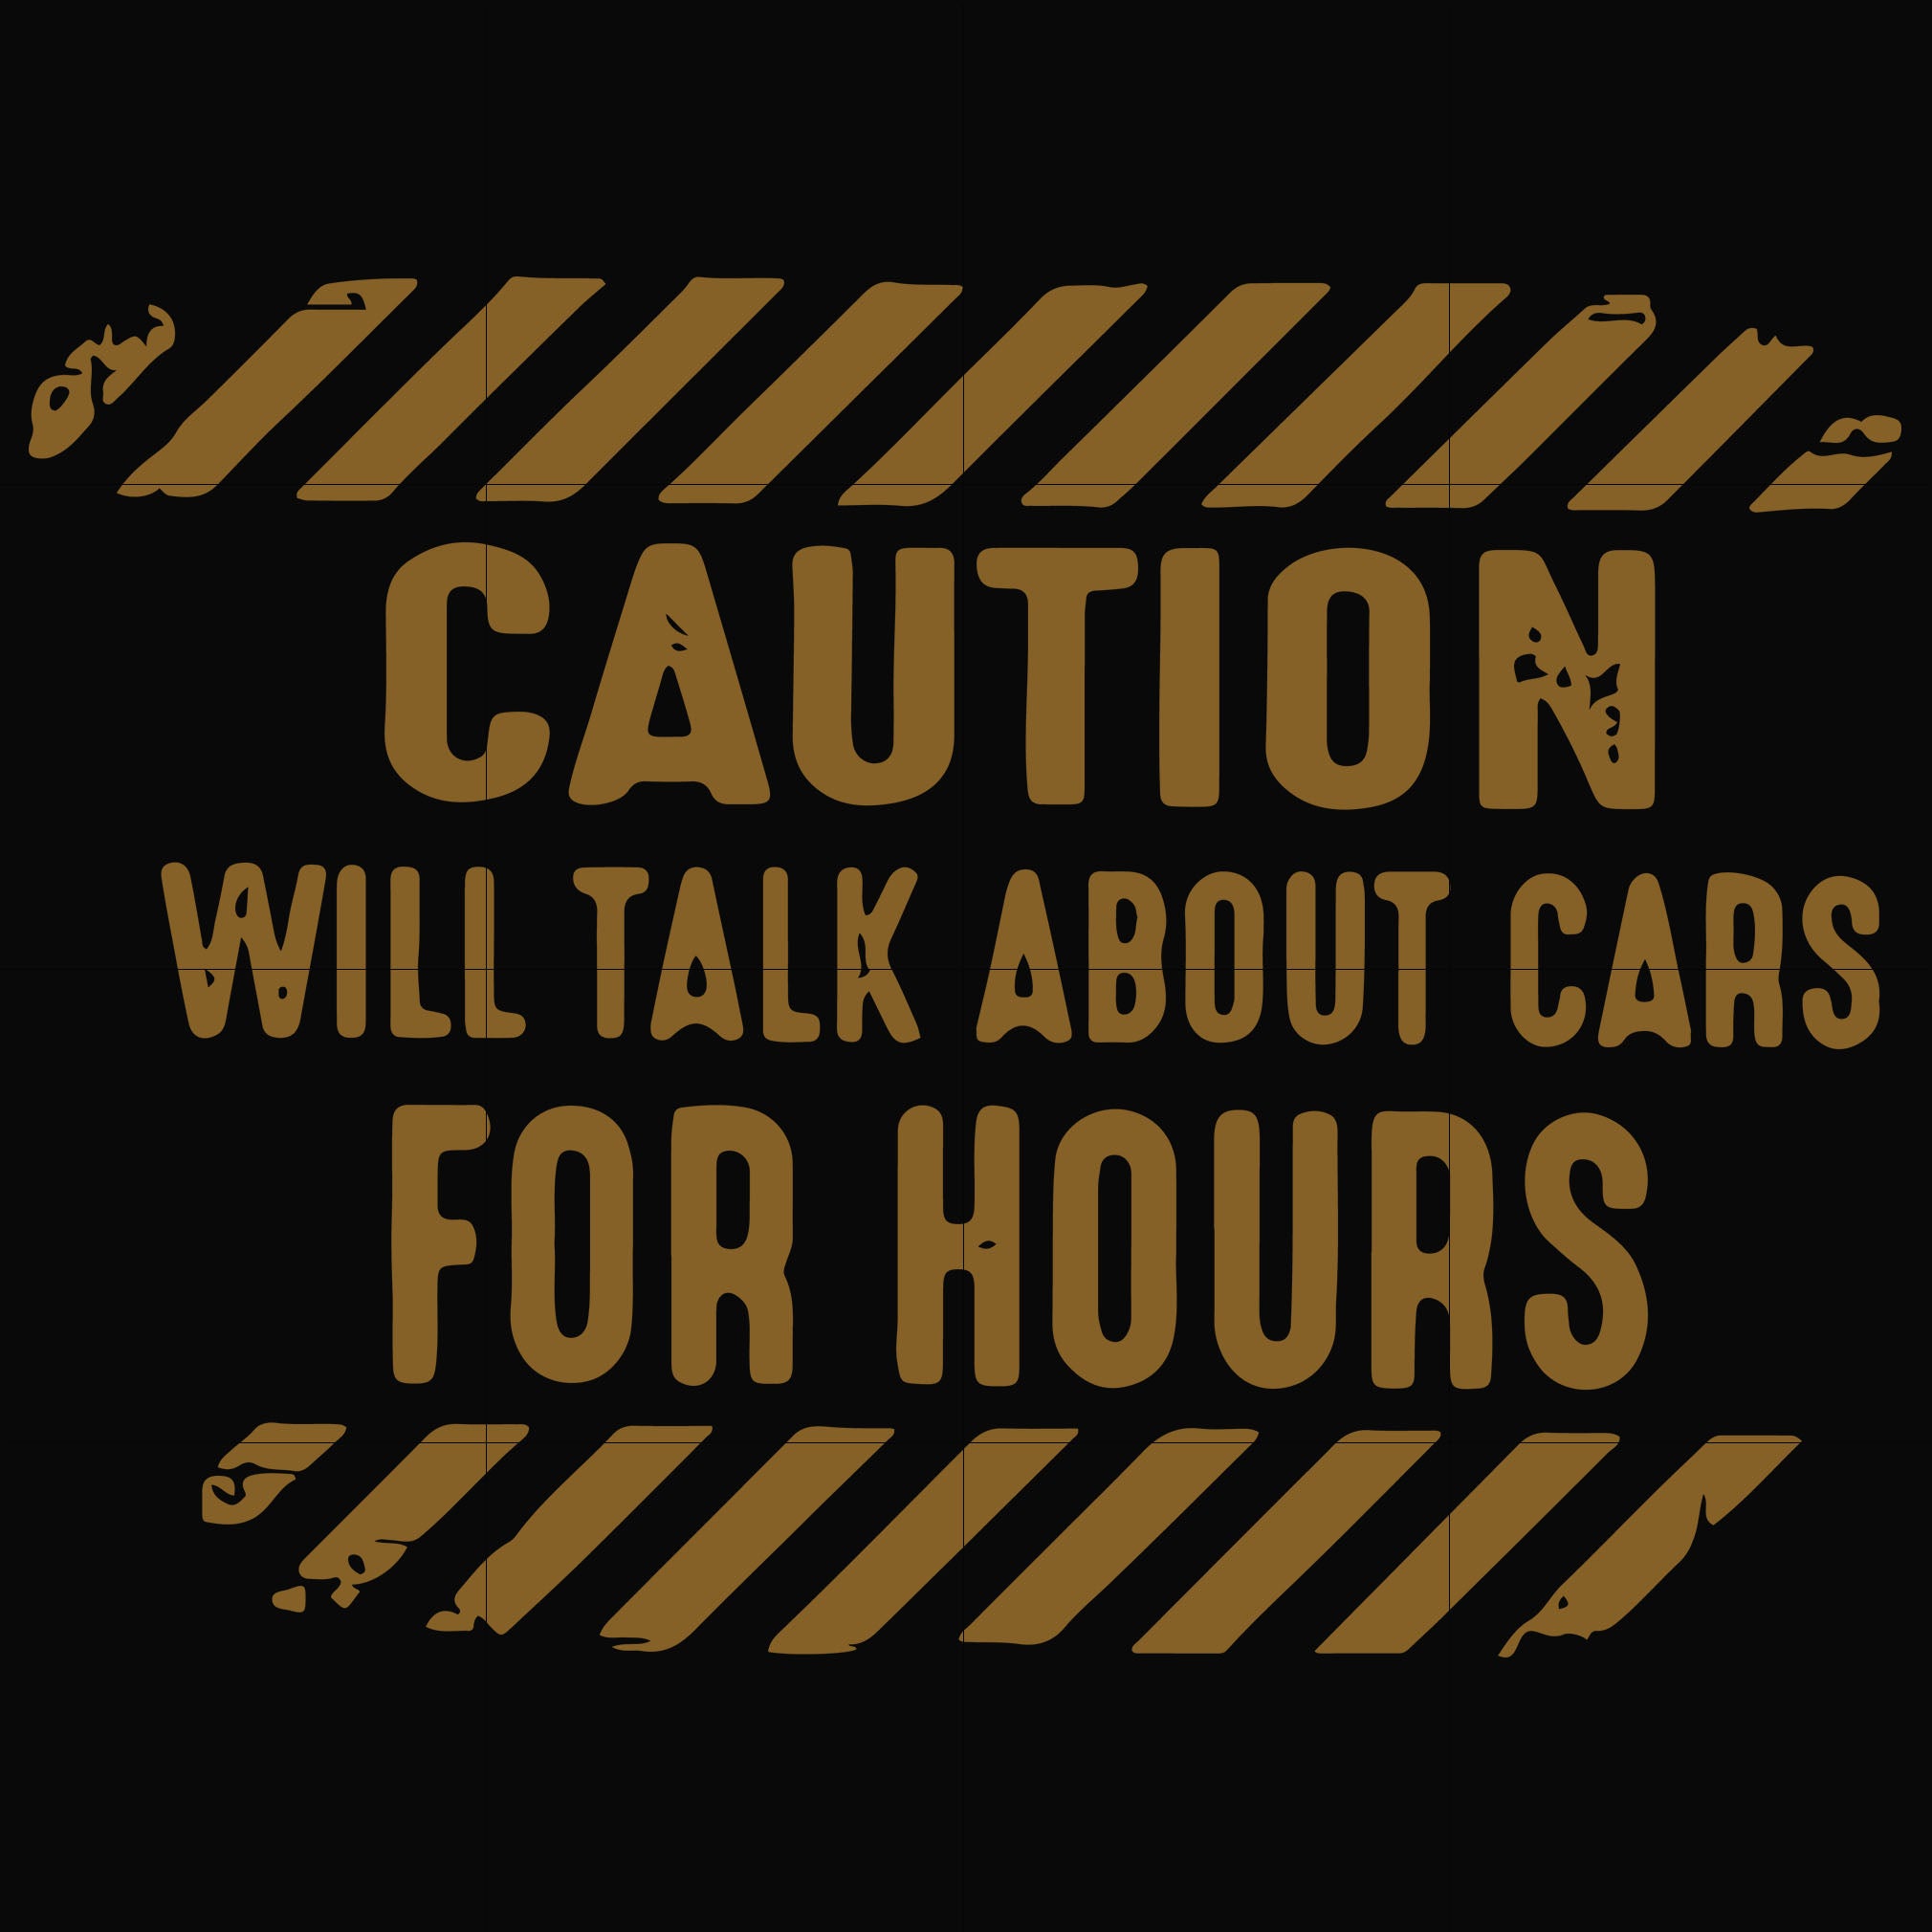 Caution will talk about cars for hours svg, png, dxf, eps file FN000802